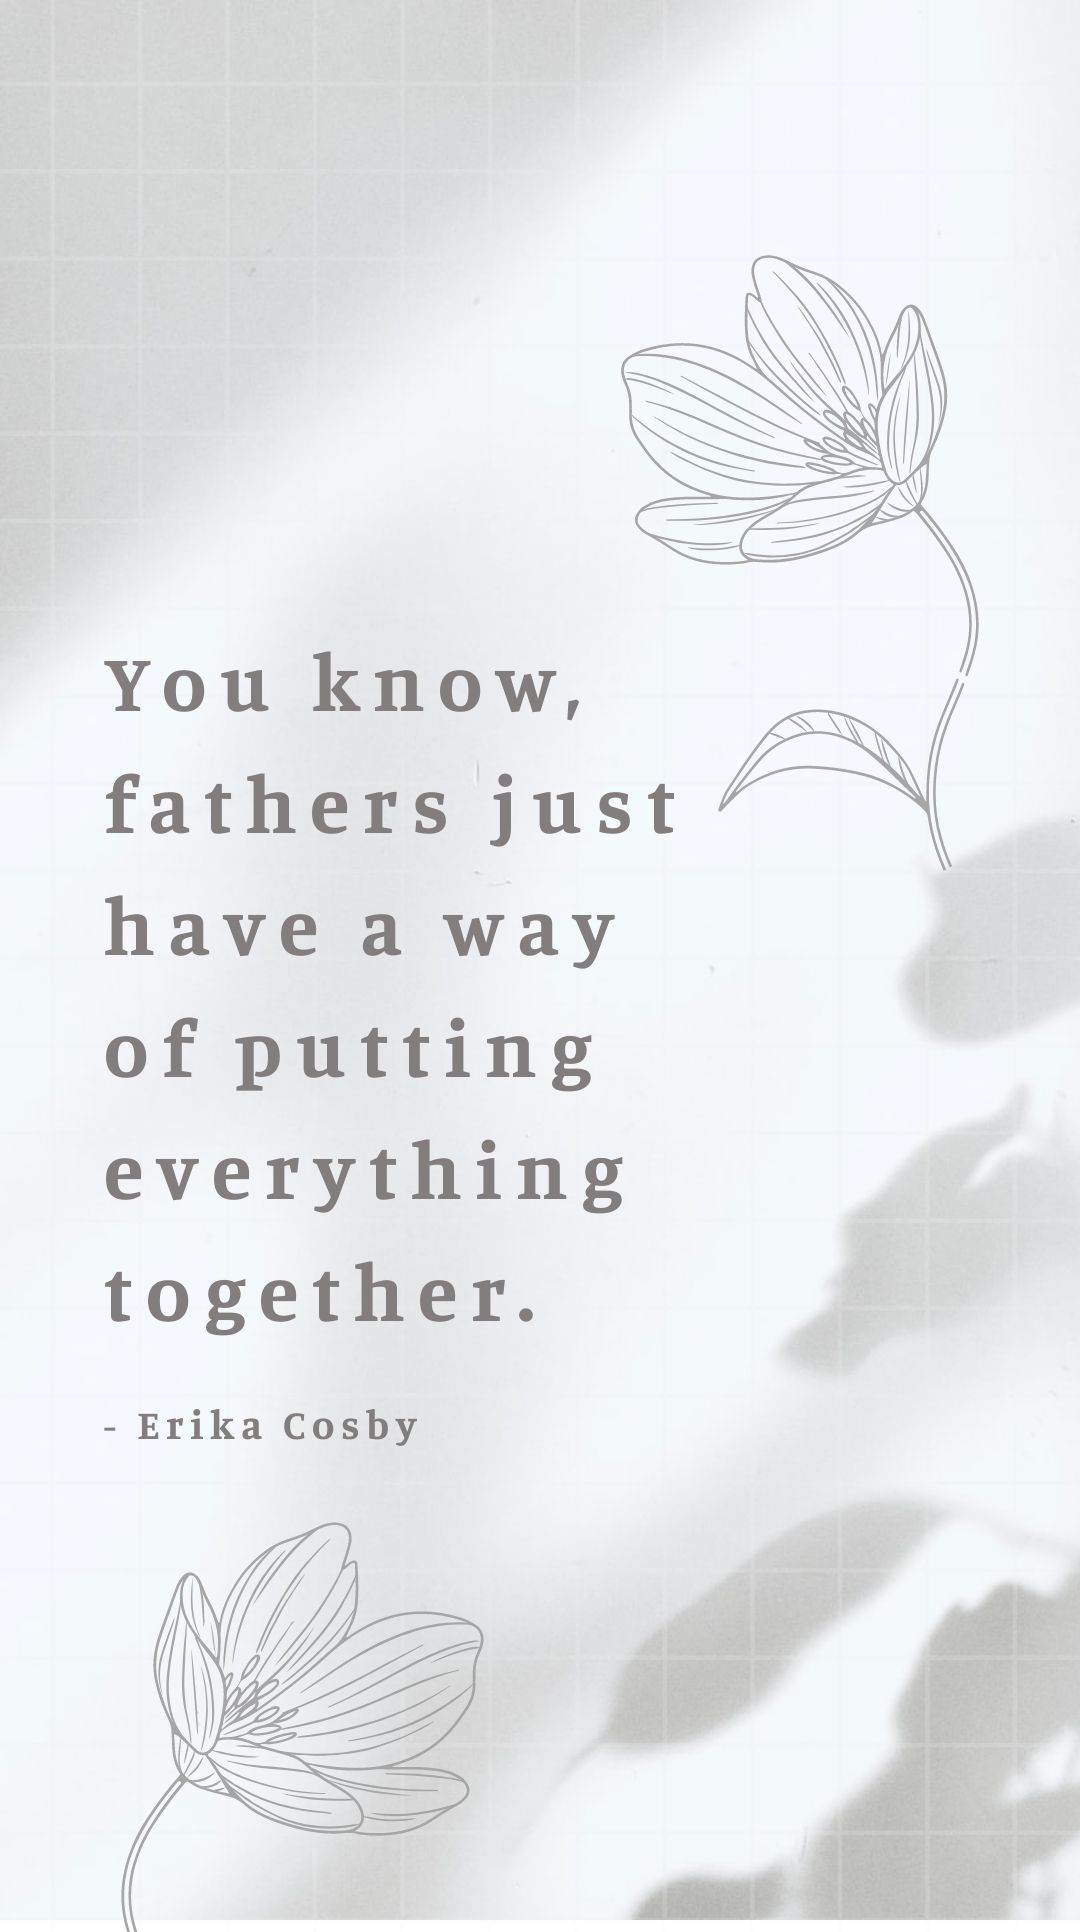 Free Erika Cosby - You know, fathers just have a way of putting everything together.